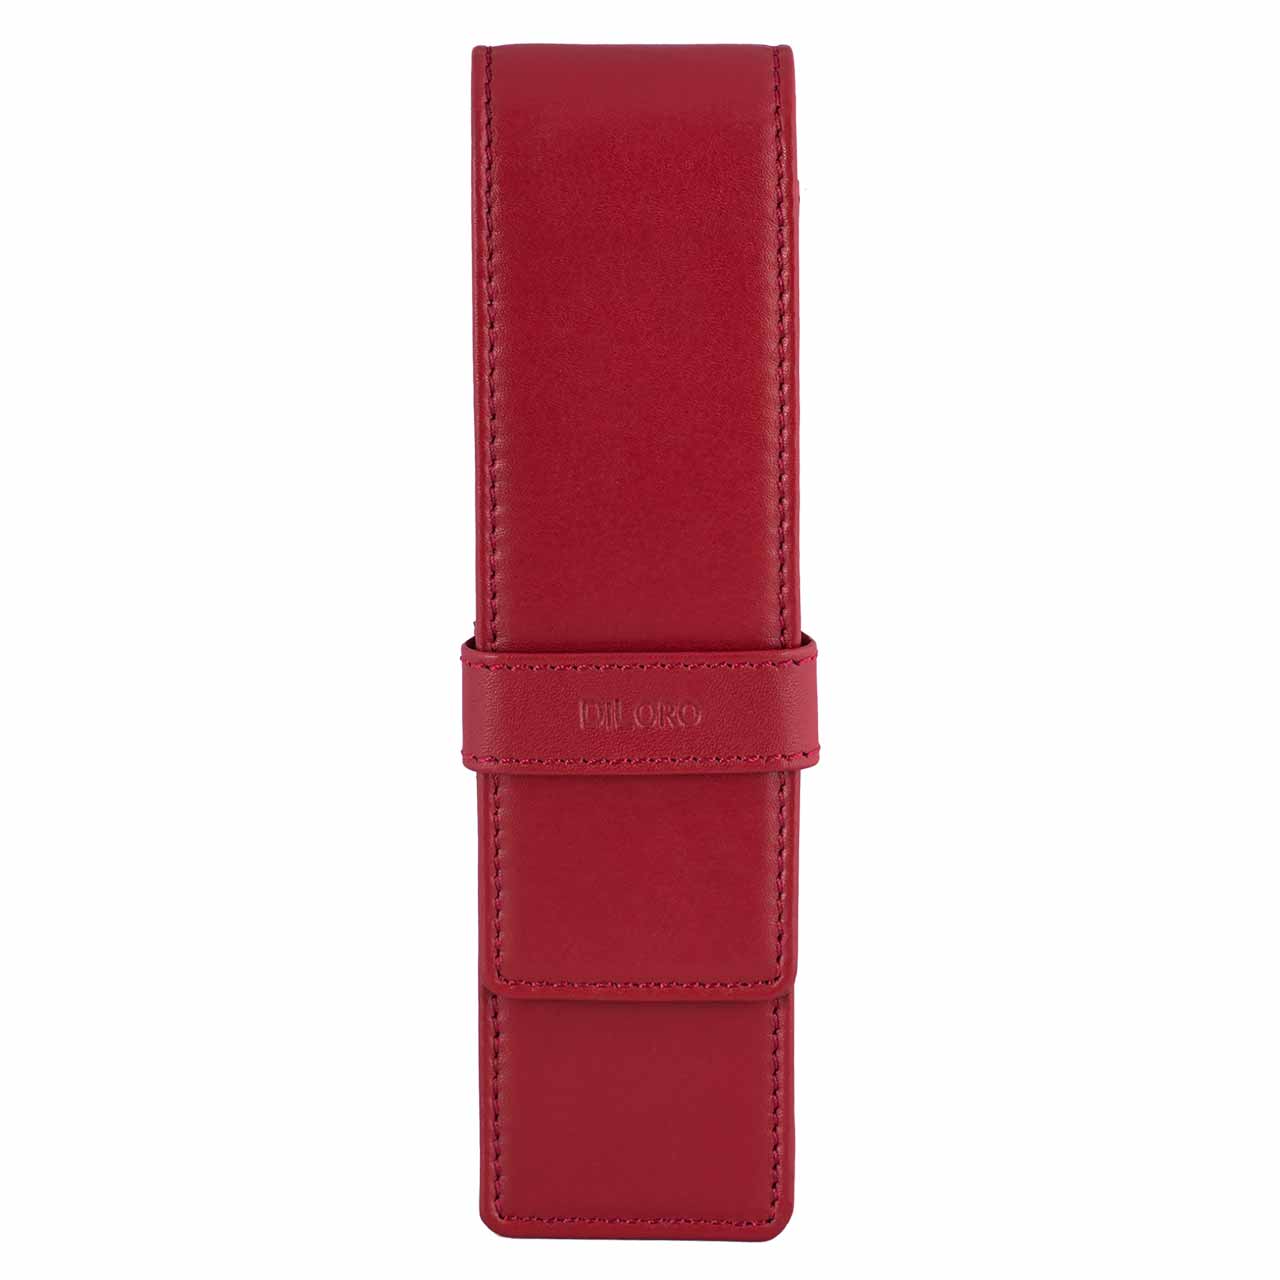 DiLoro Double Pen Case Holder in Top Quality, Full Grain Nappa Leather - Venetian Red (front view)